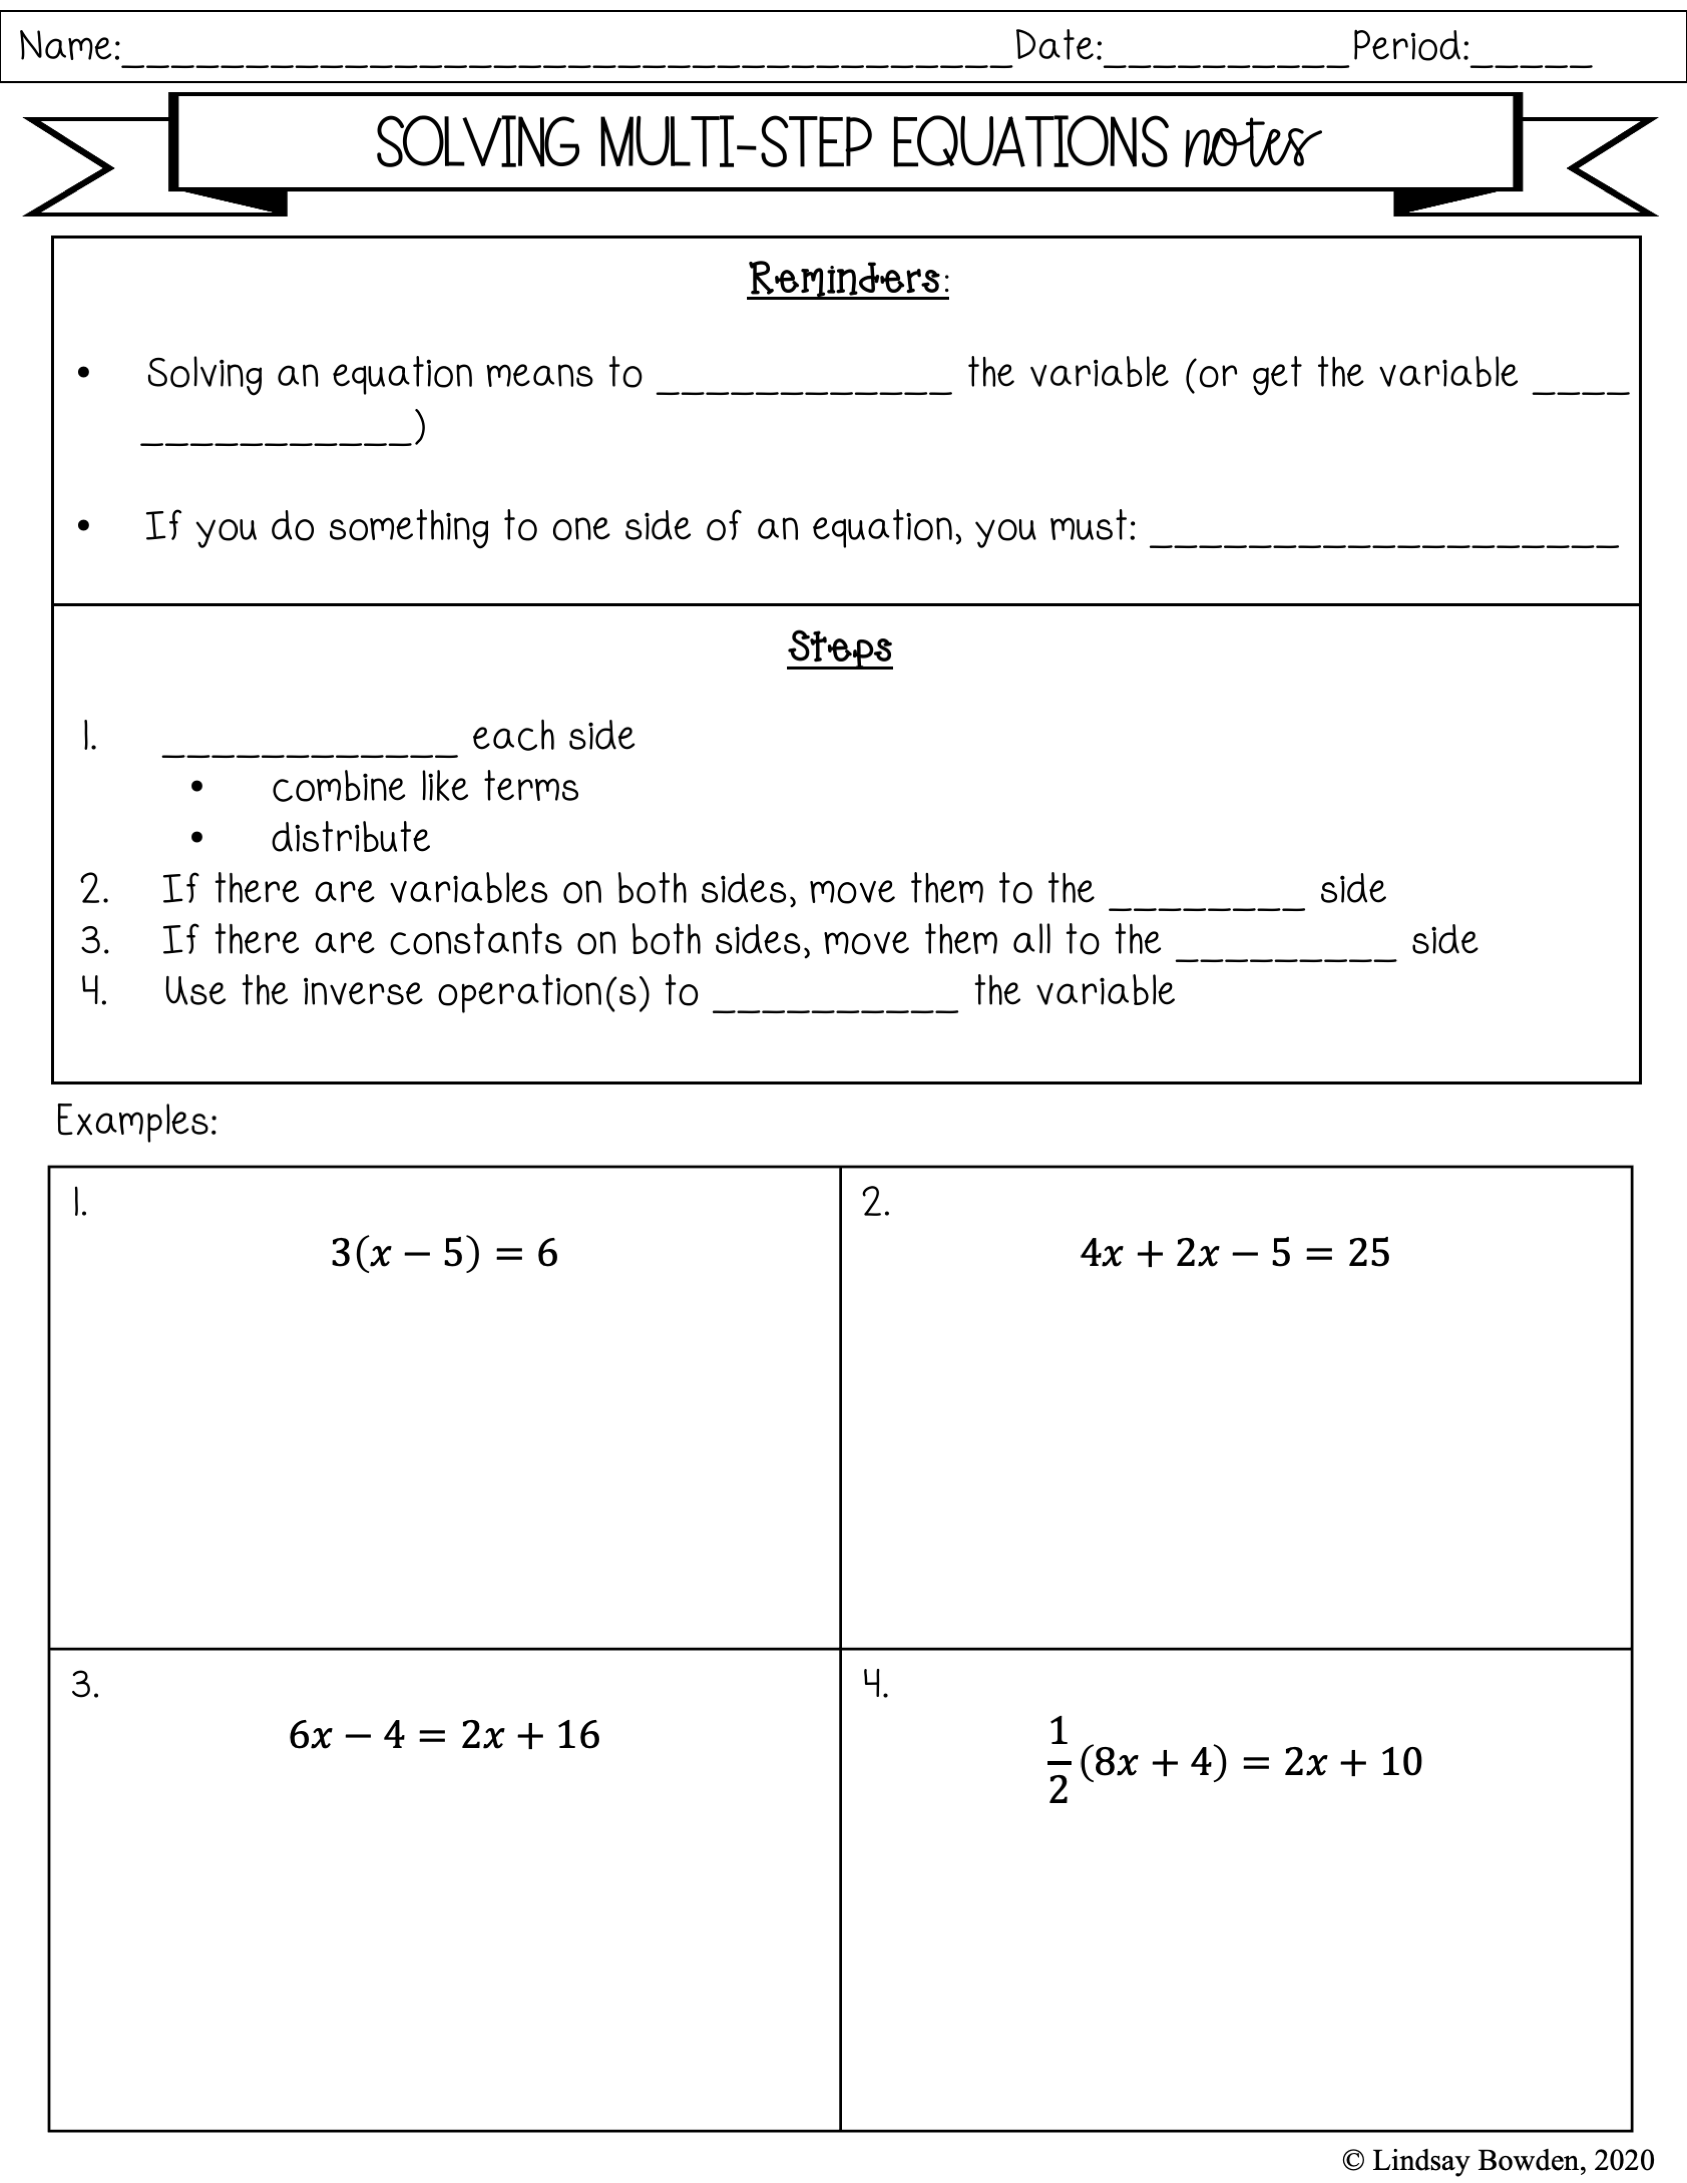 Multi-Step Equation Notes and Worksheets - Lindsay Bowden Pertaining To Combining Like Terms Equations Worksheet